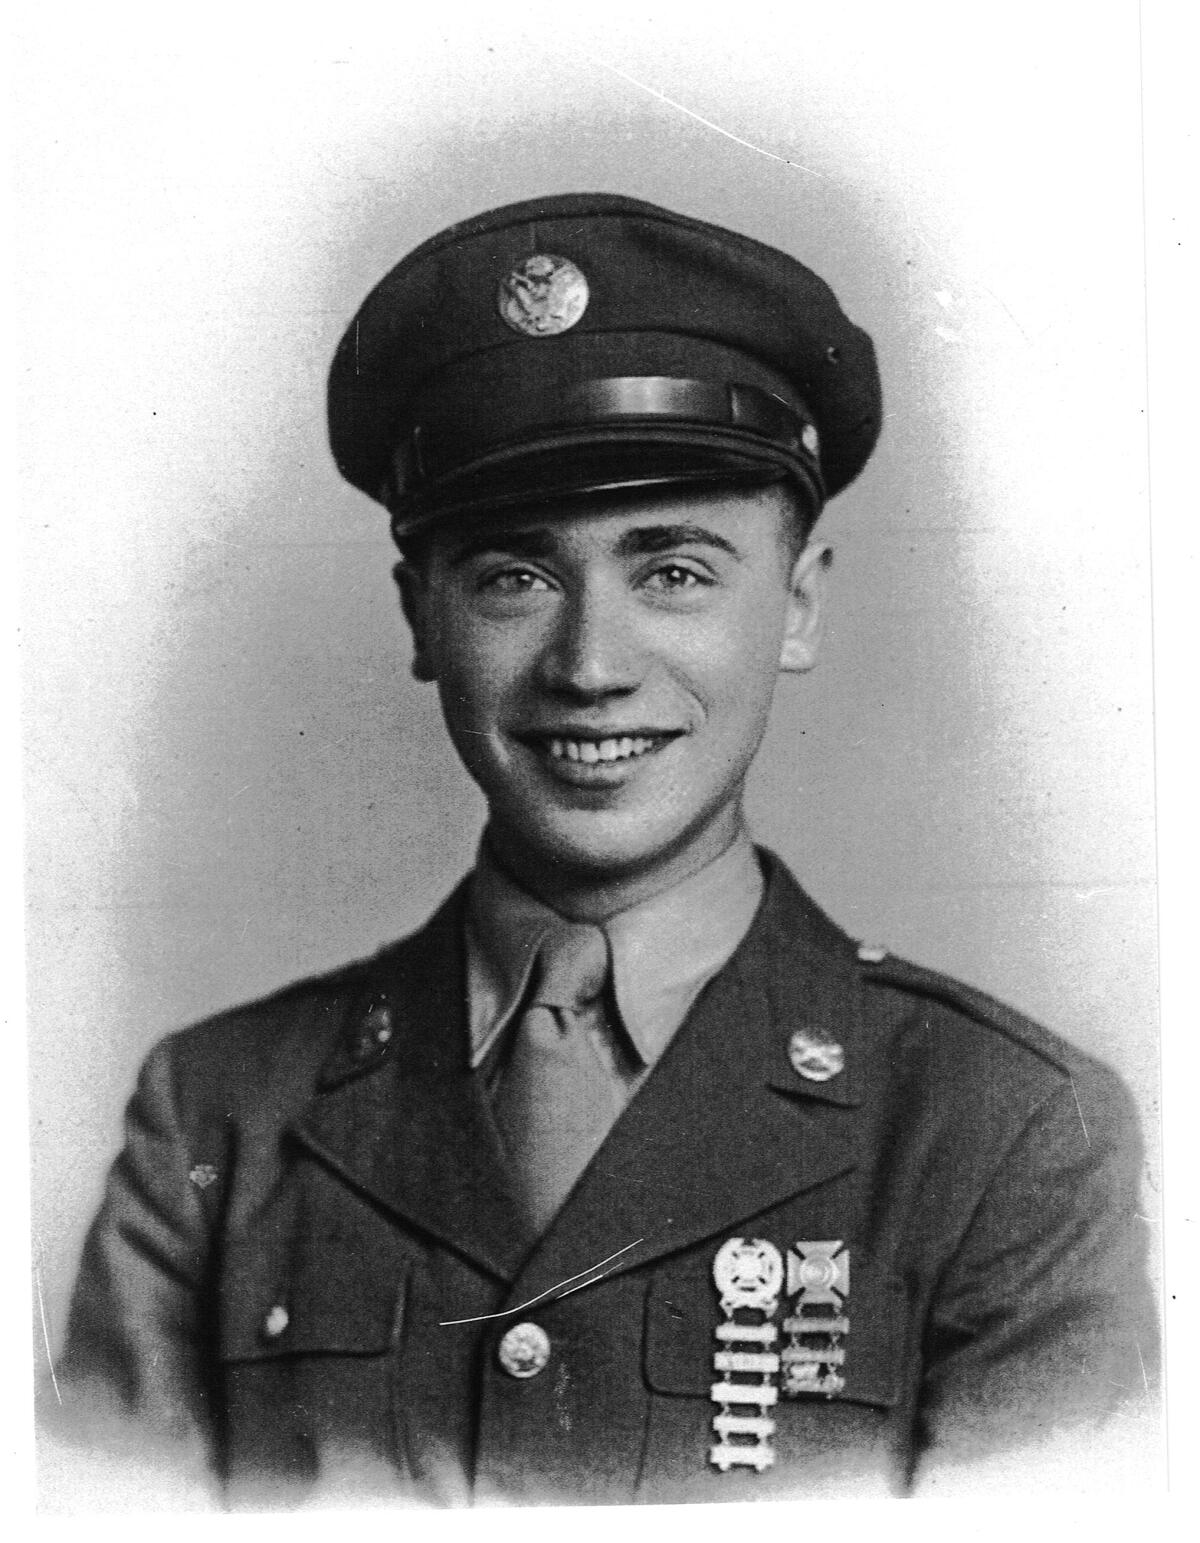 Private First Class Ernest Racer